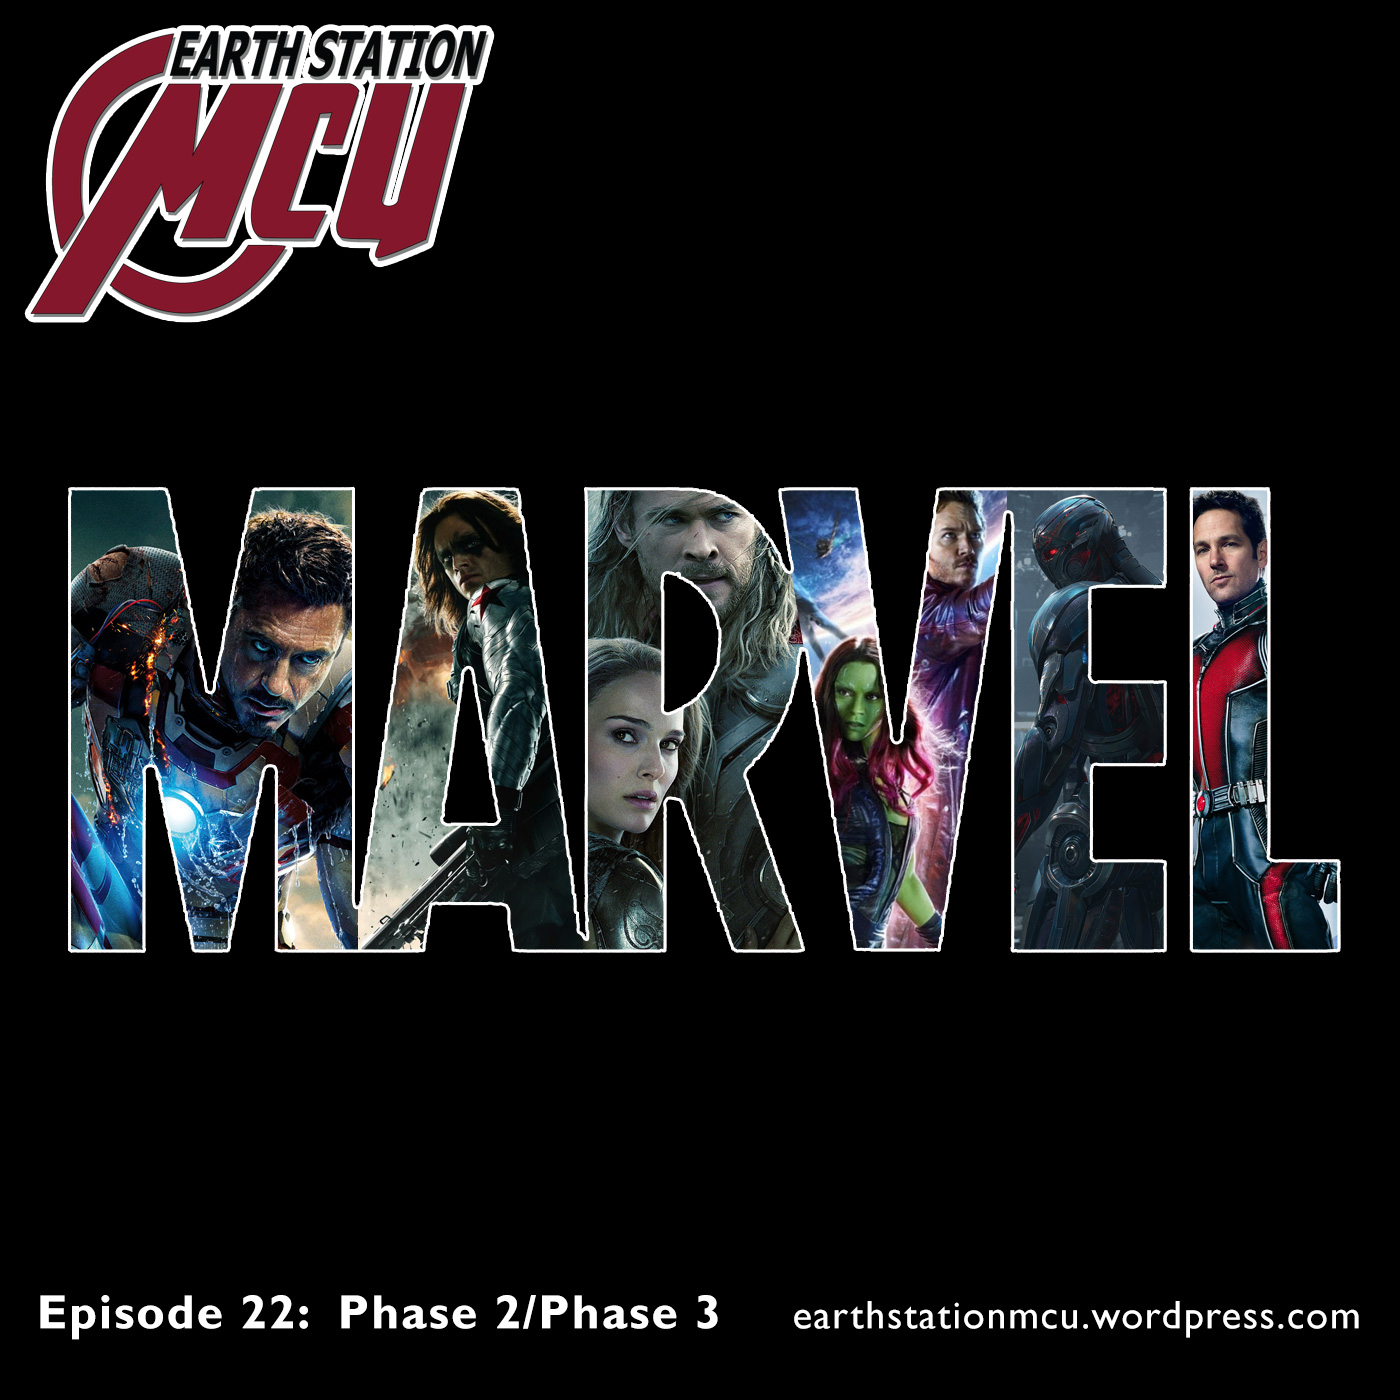 Earth Station MCU Episode 22: Phase 2 and Phase 3